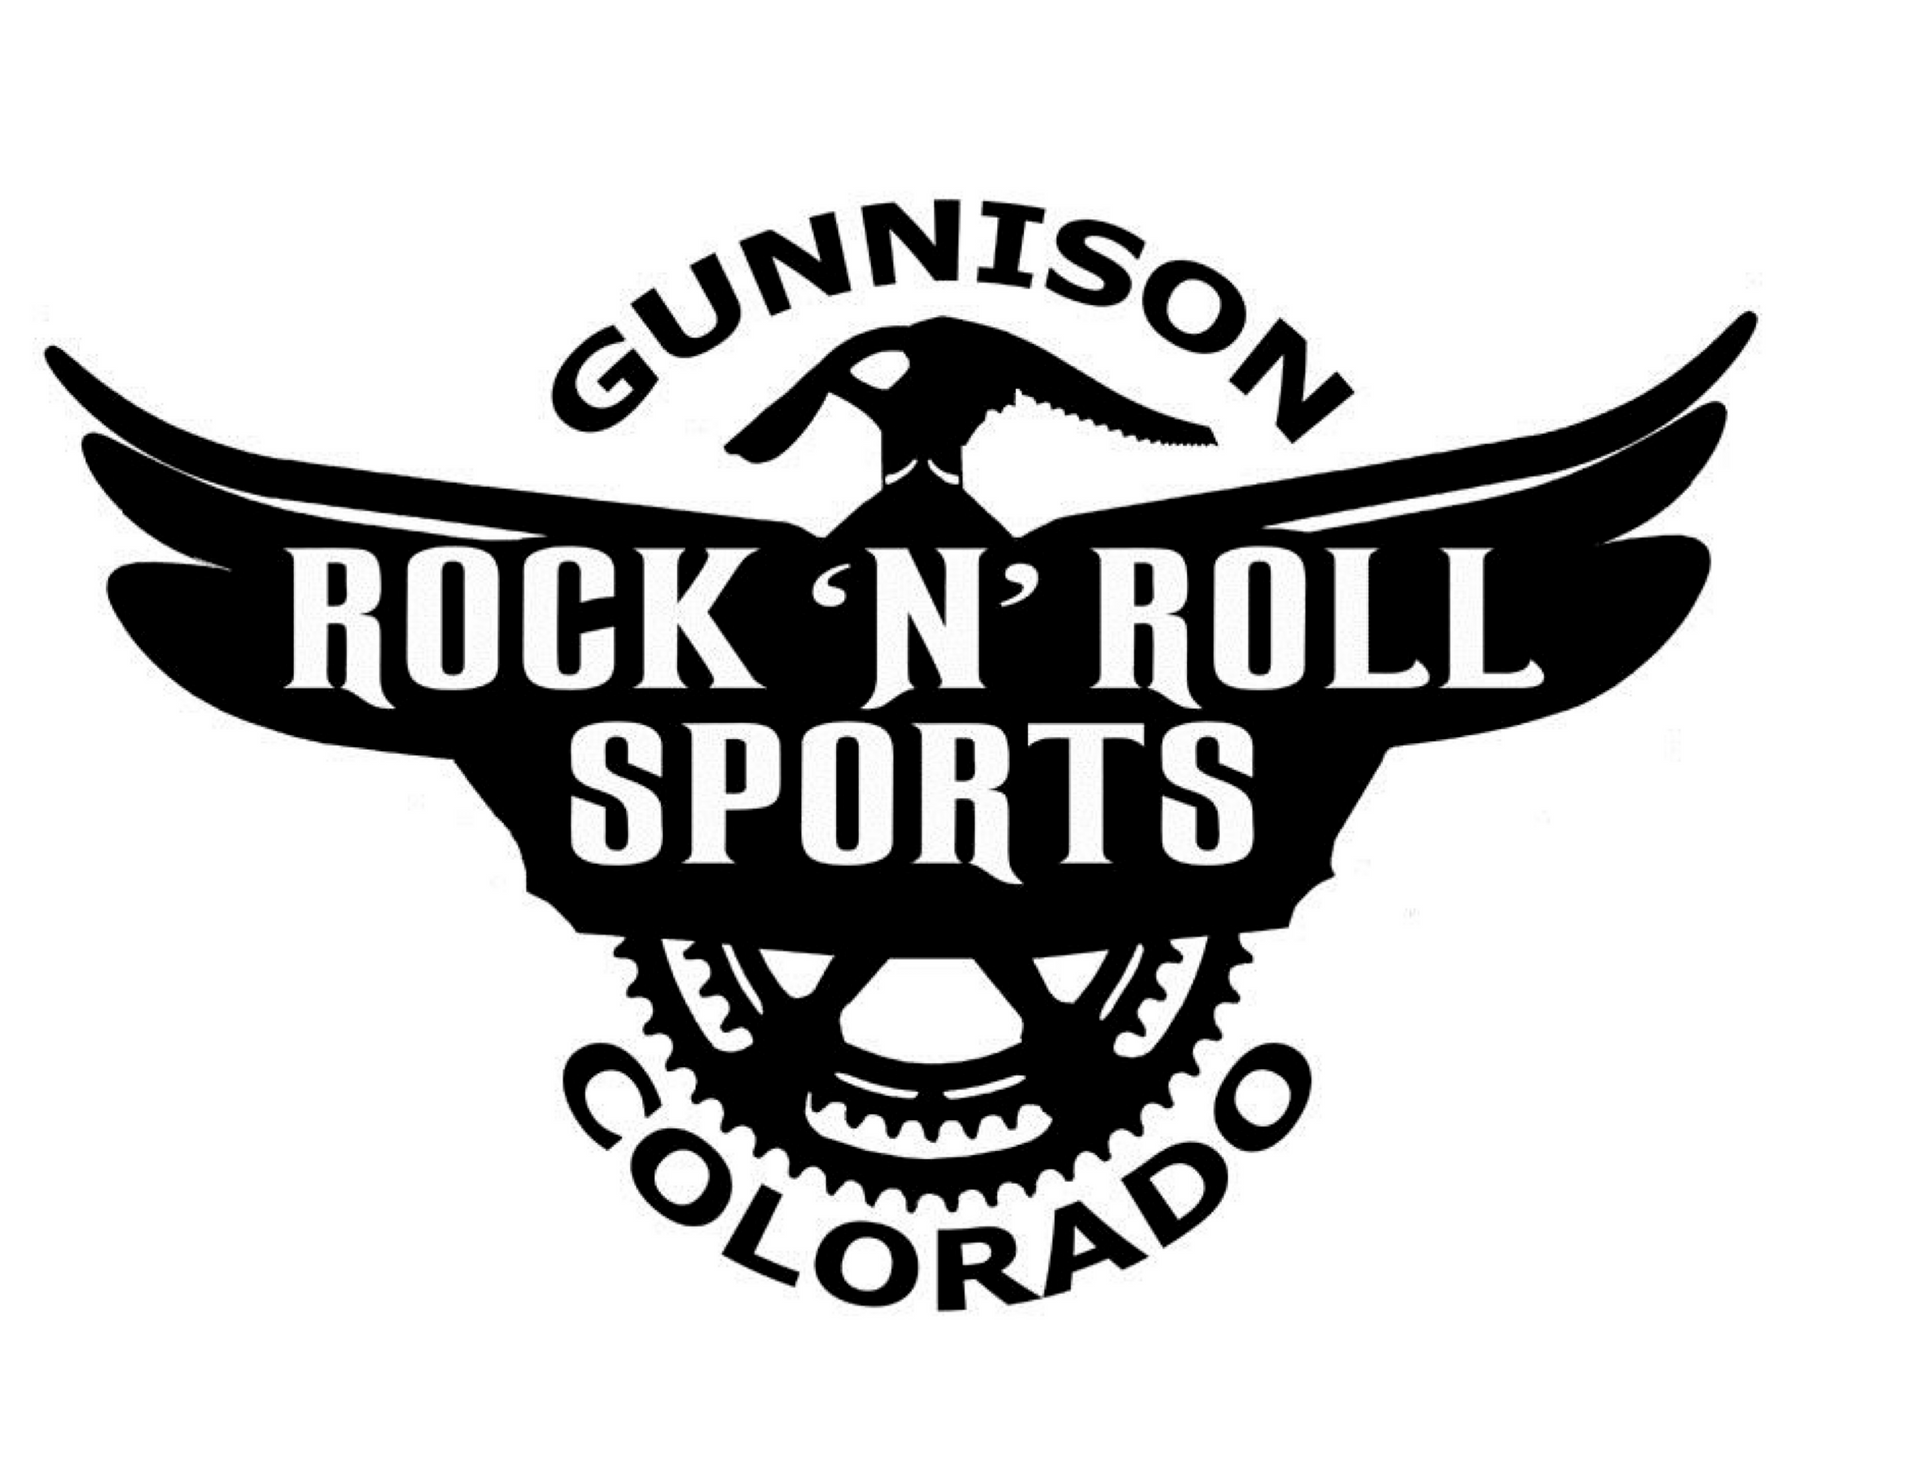 About, Rock 'N' Roll Sports